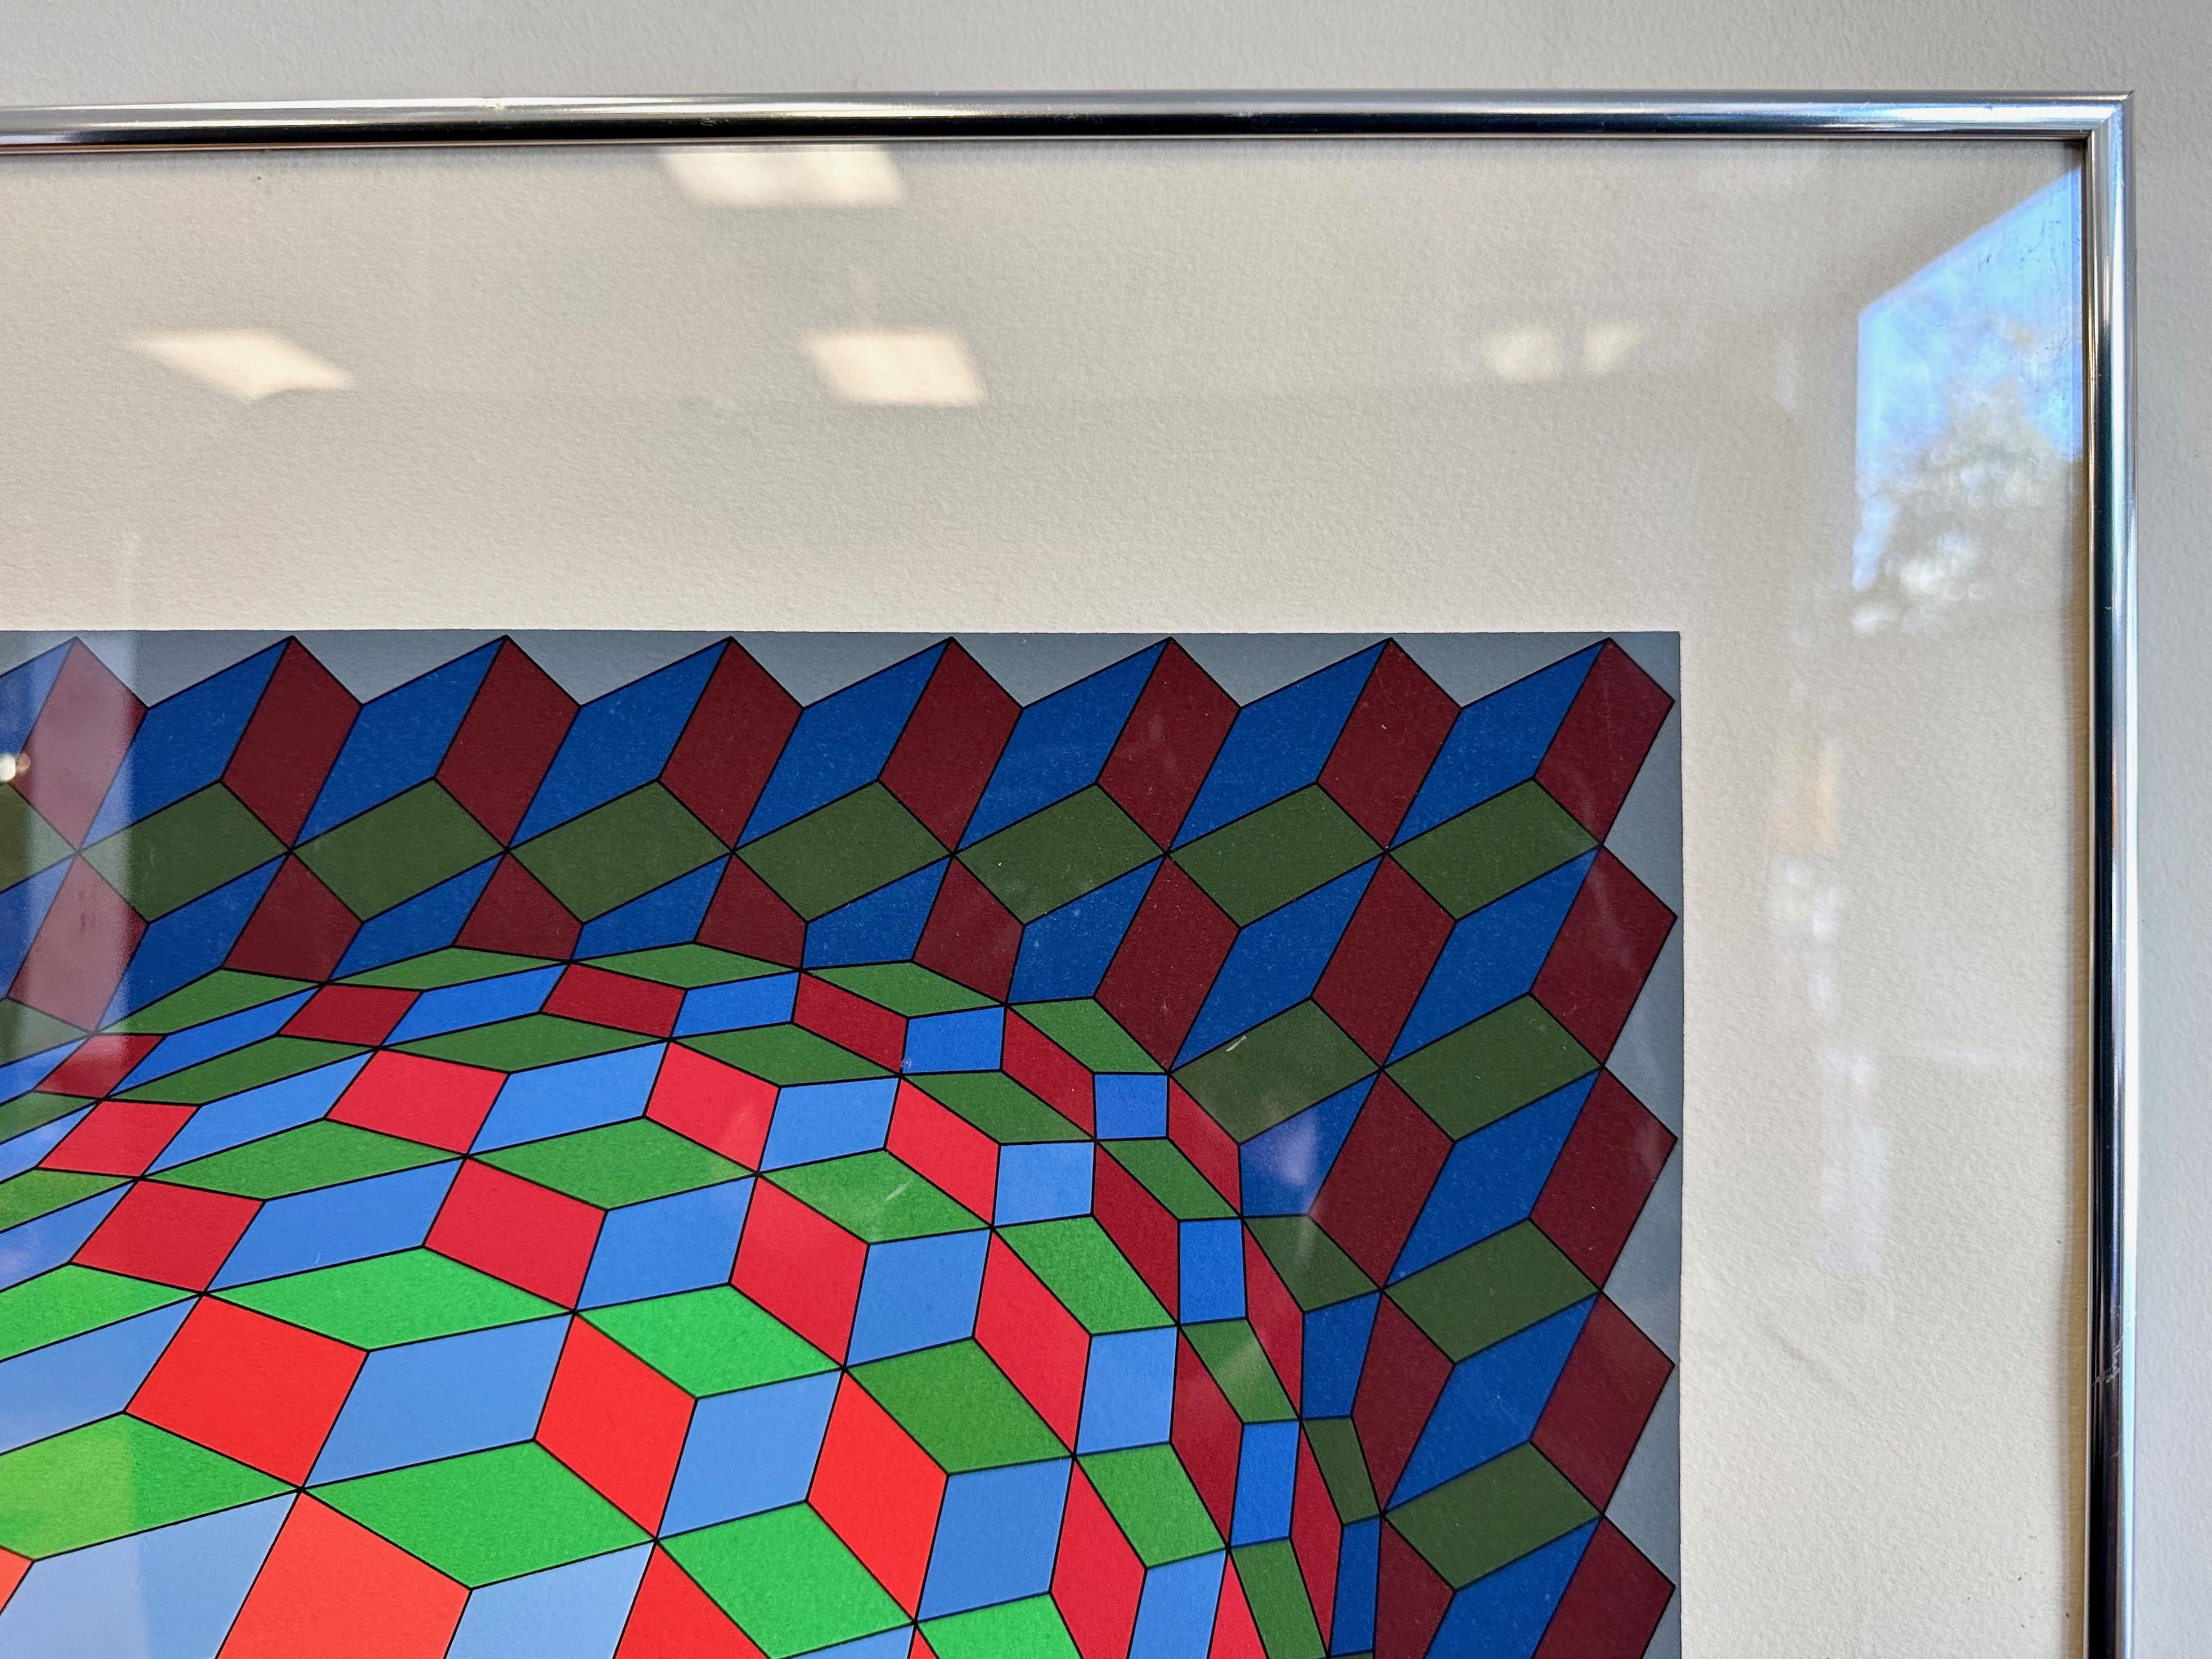 American Victor Vasarely, “Torony III”, Op Art Serigraph, Signed and Numbered, 1970s For Sale